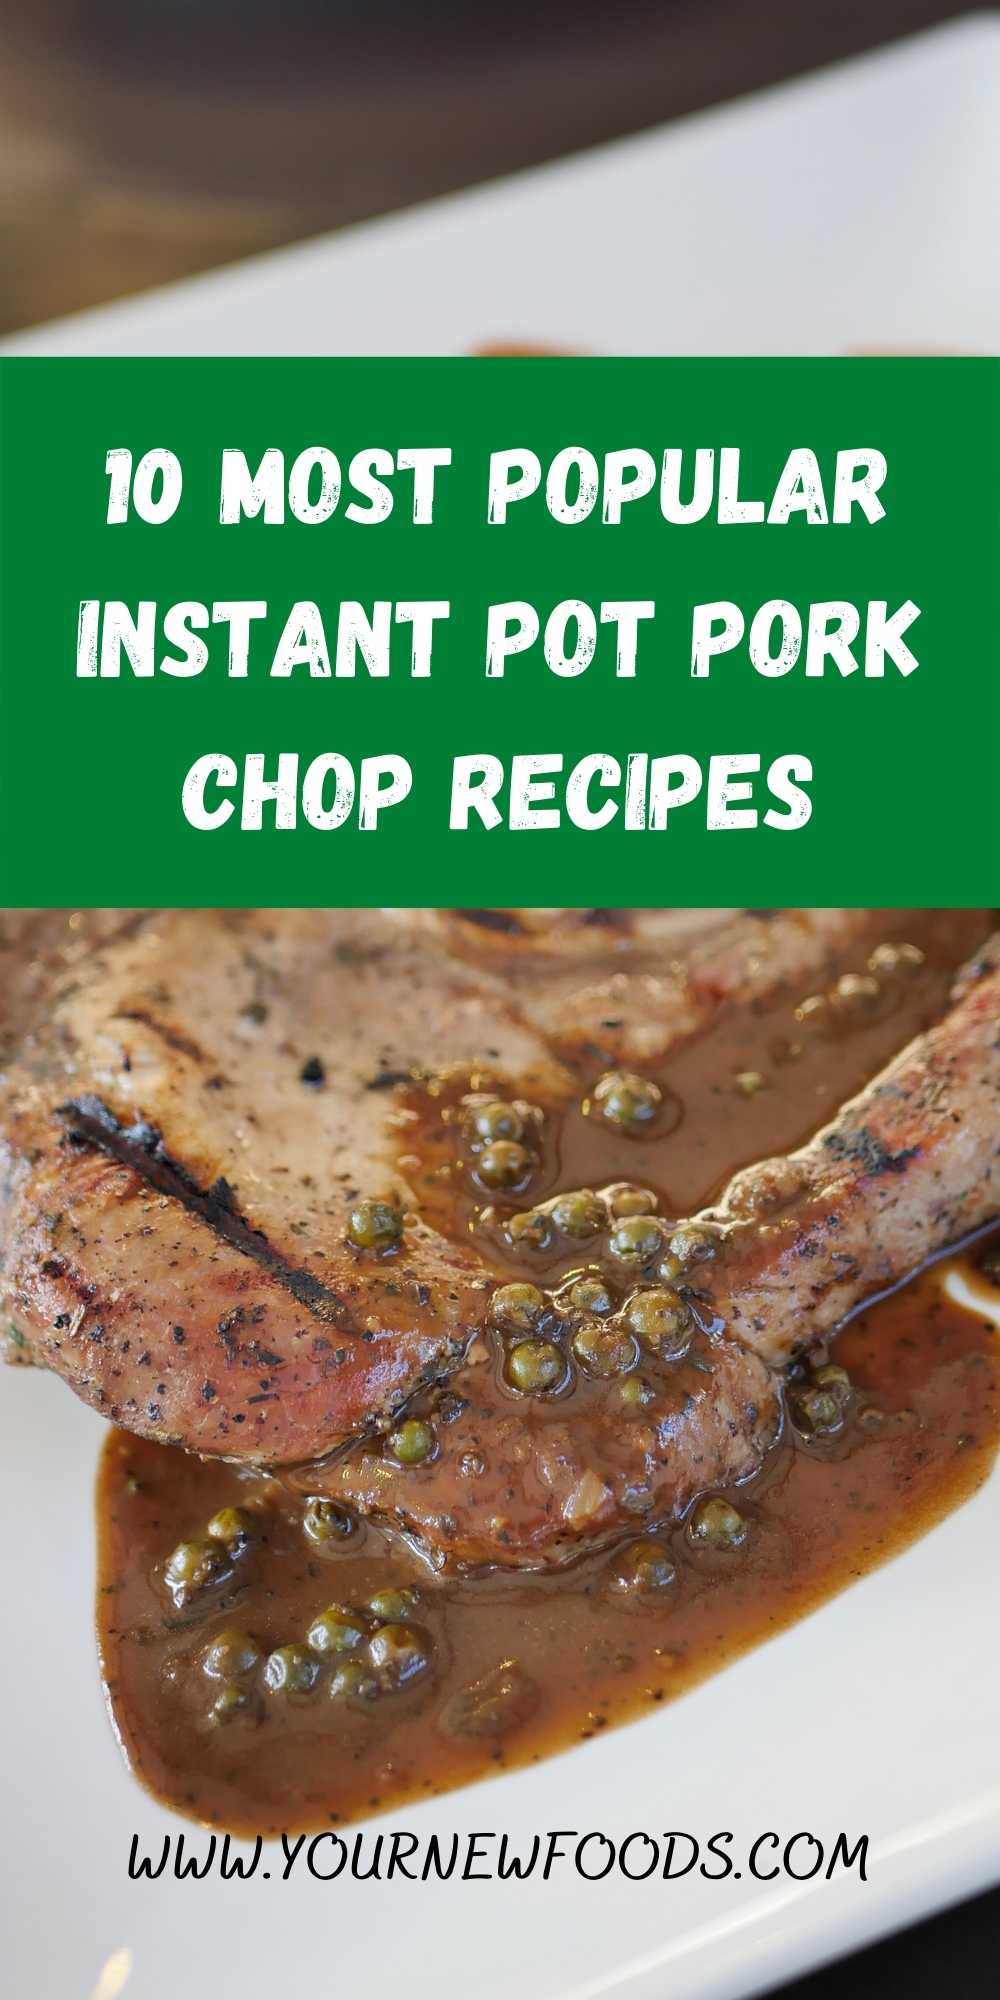 pork chop 10 instant pot recipes showing a pork chop cooked with peppercorn sauce on a white plate